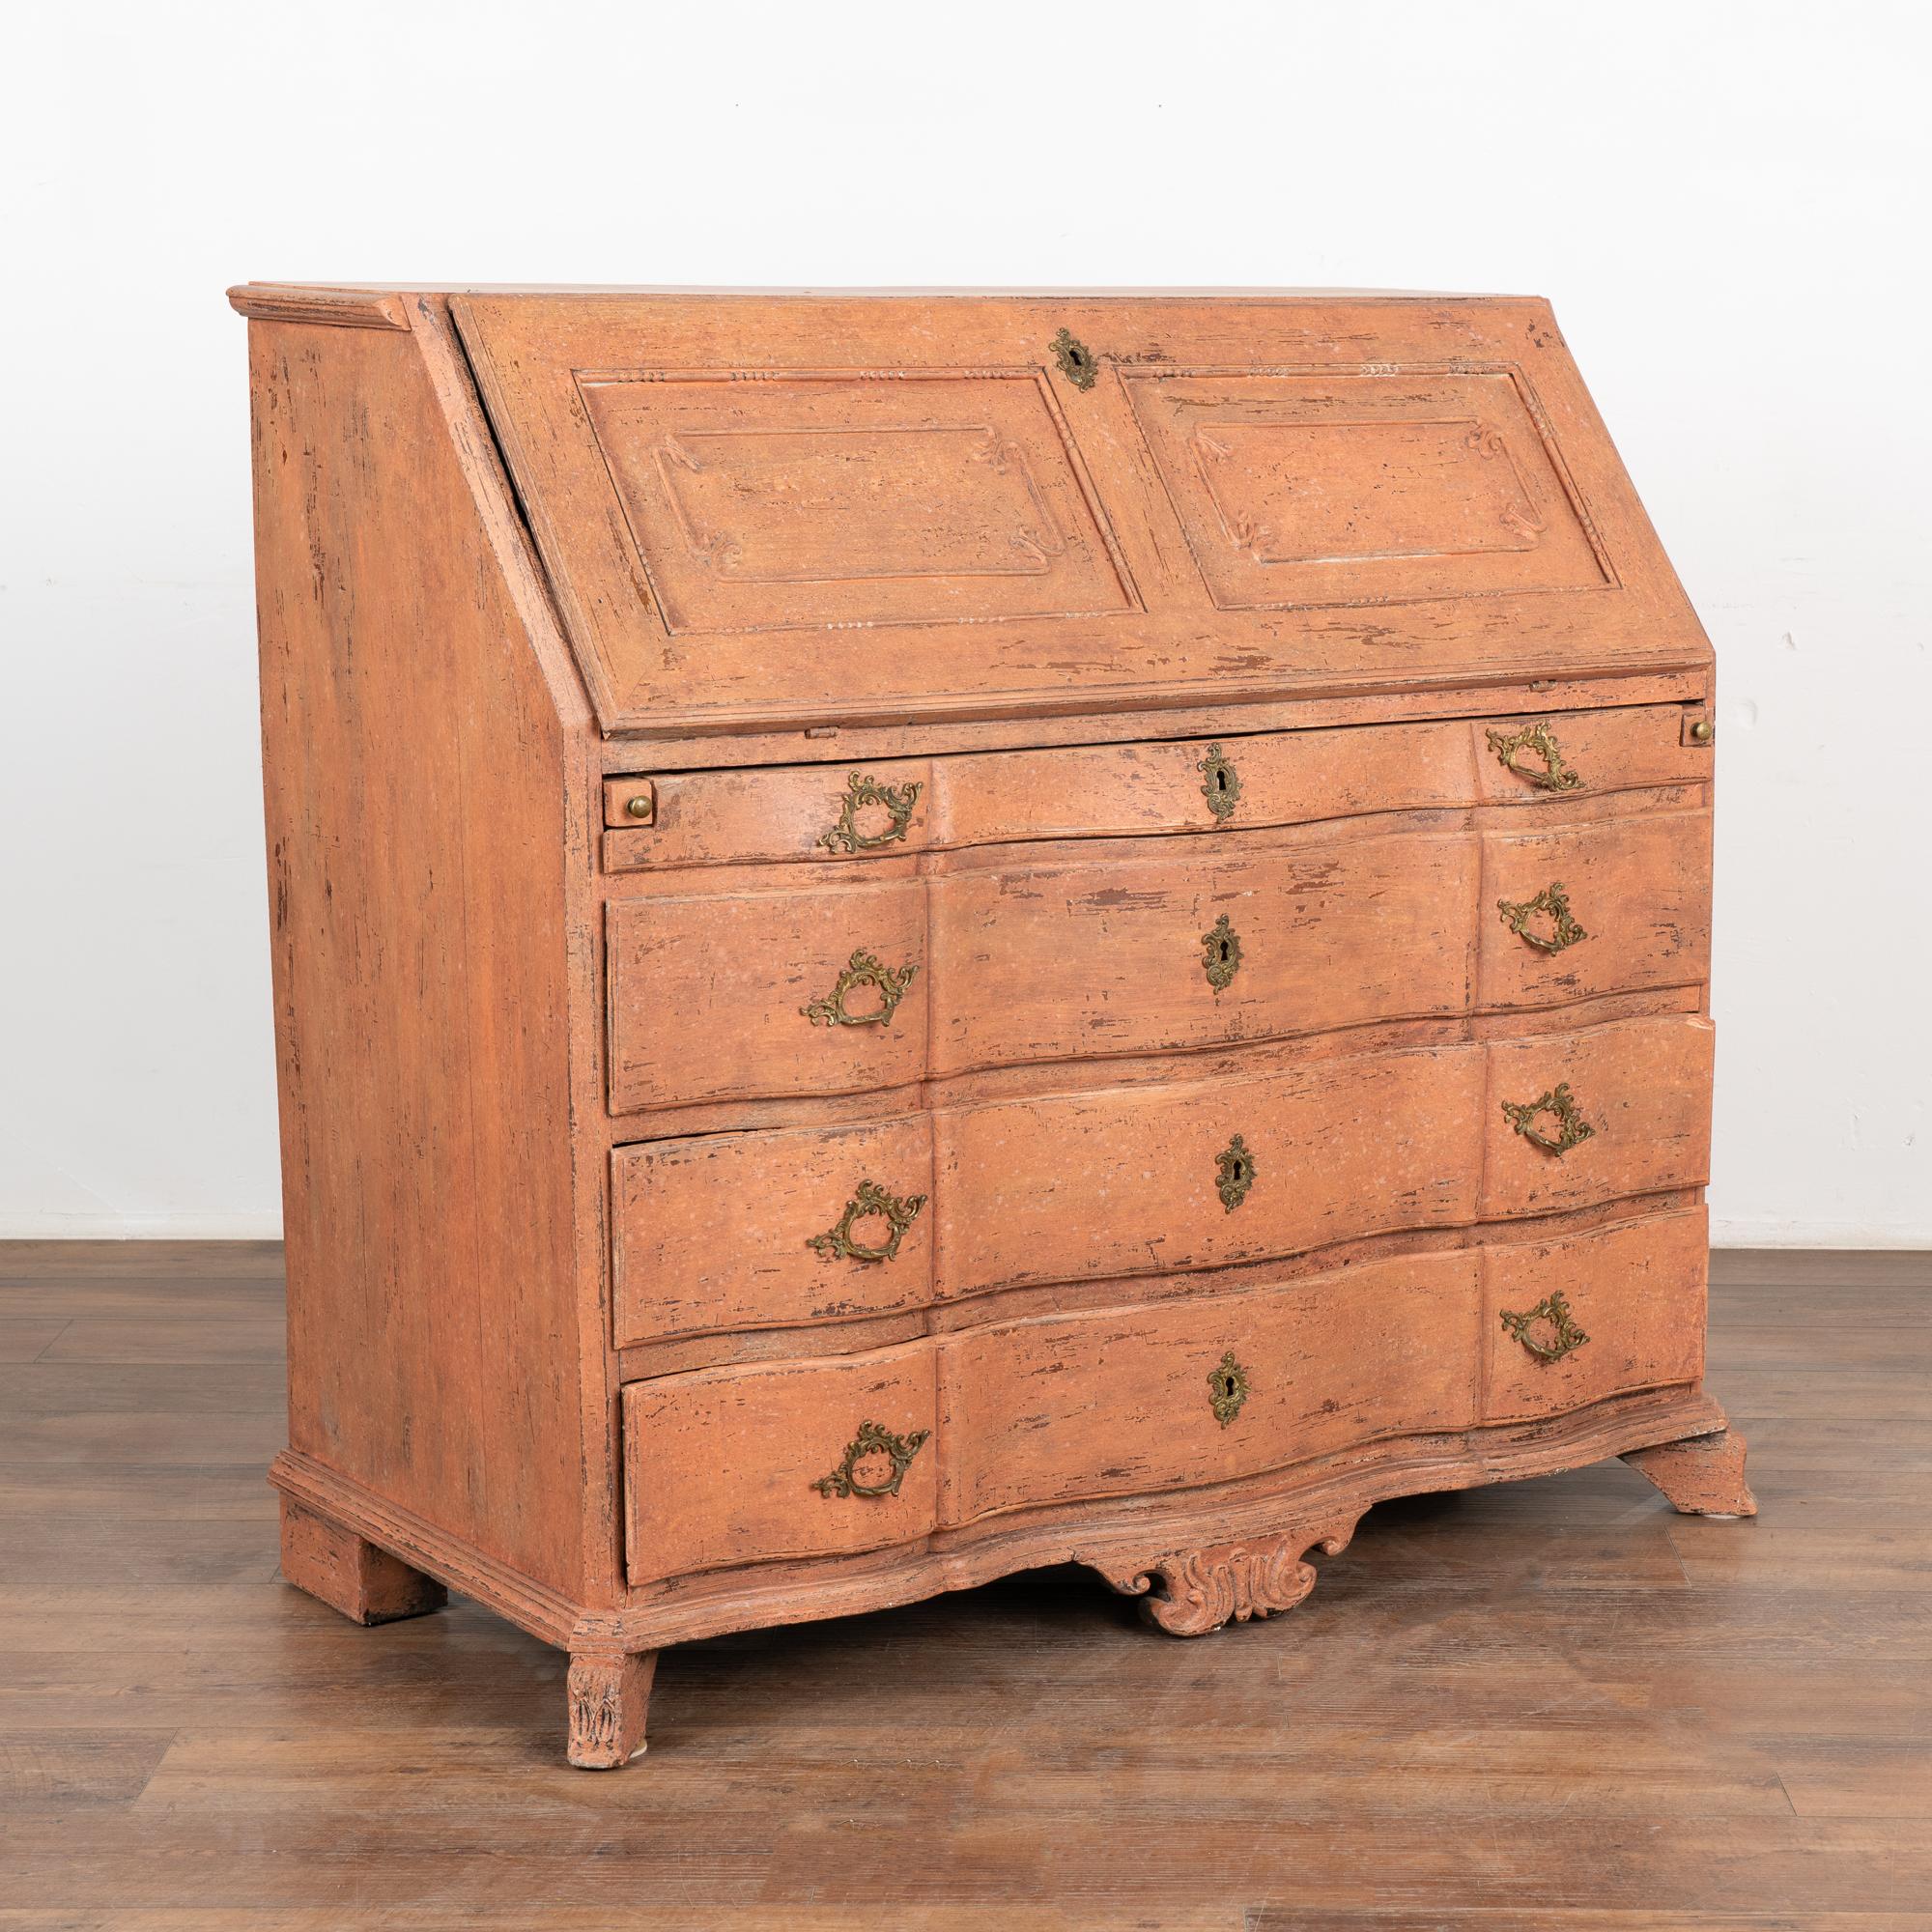 Oak Secretary Bureau With Painted Finish from Sweden circa 1760-1800 In Good Condition For Sale In Round Top, TX